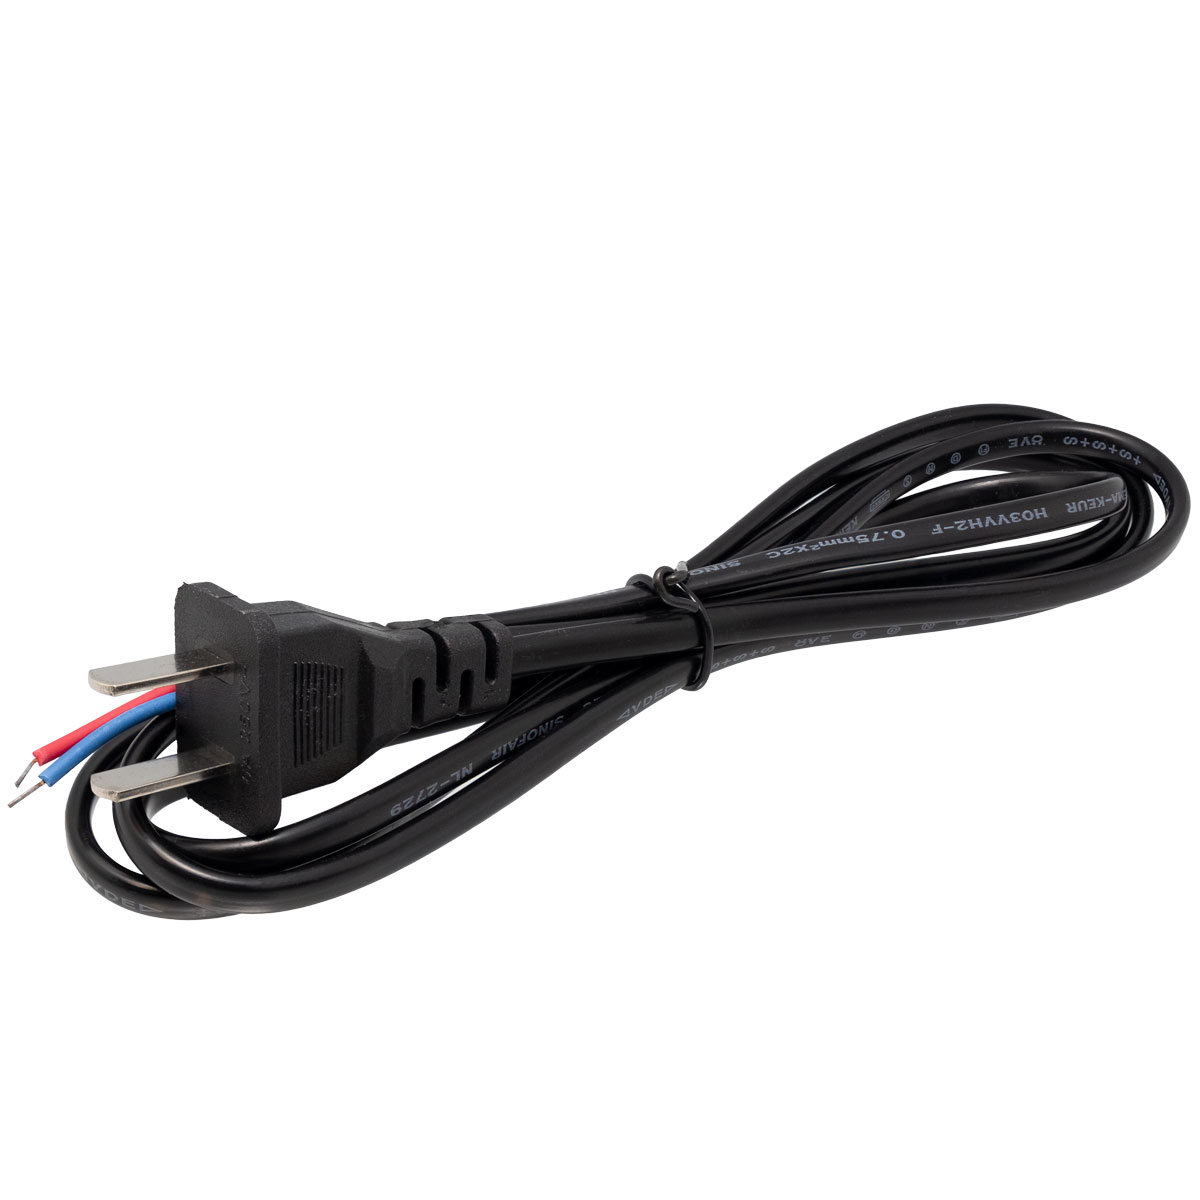 US-POWER SUPPLY CABLE, 2x0.75mm, 1.5m